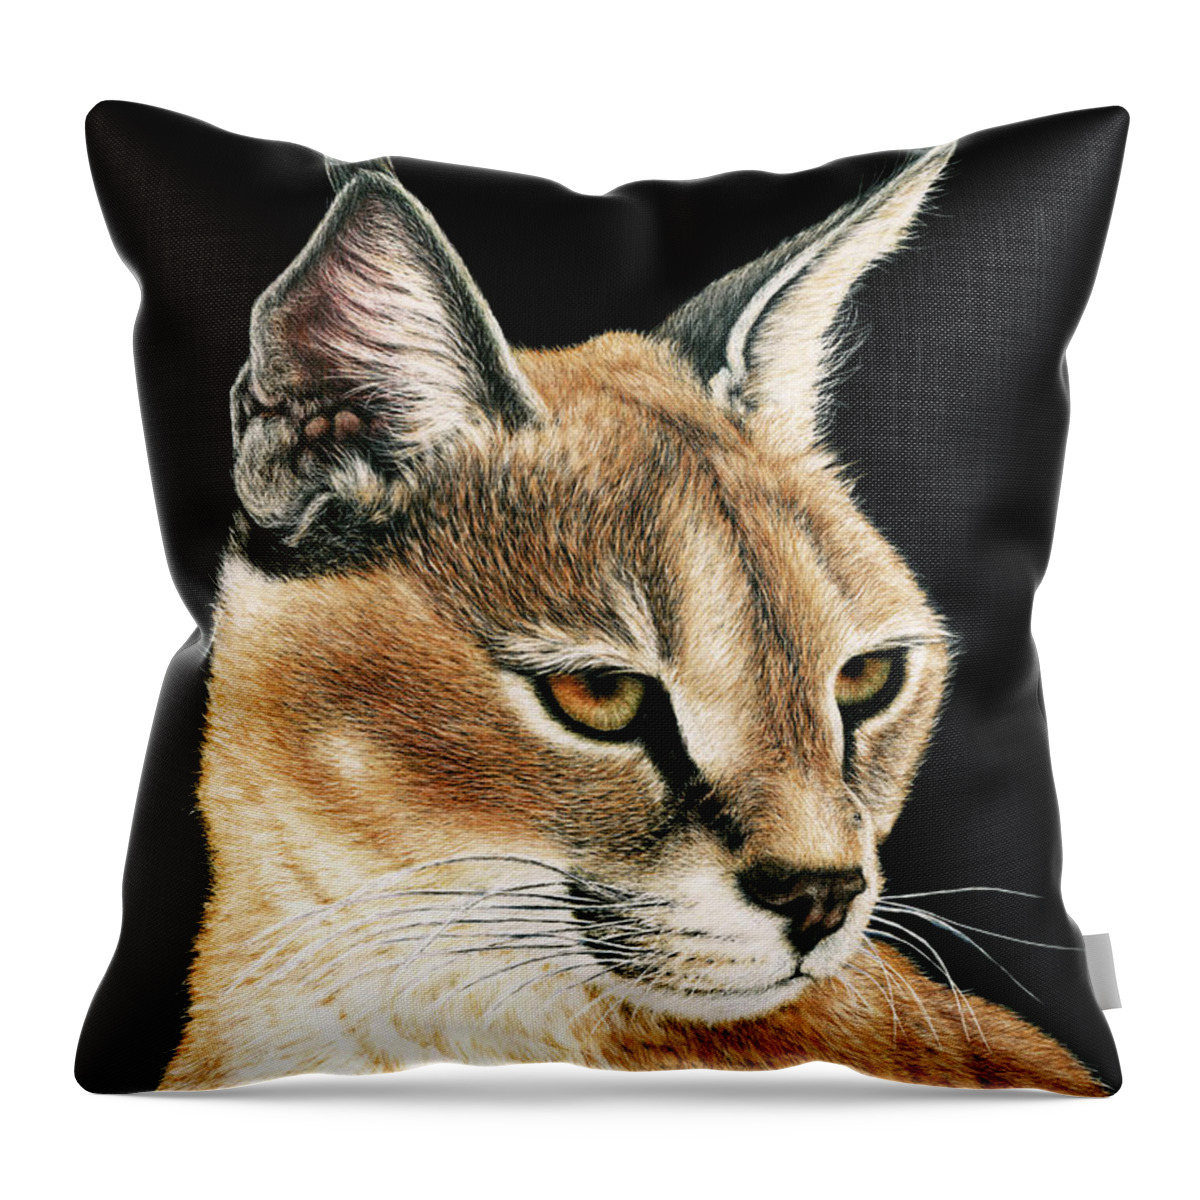 Caracal Throw Pillow featuring the painting Caracal by Monique Morin Matson